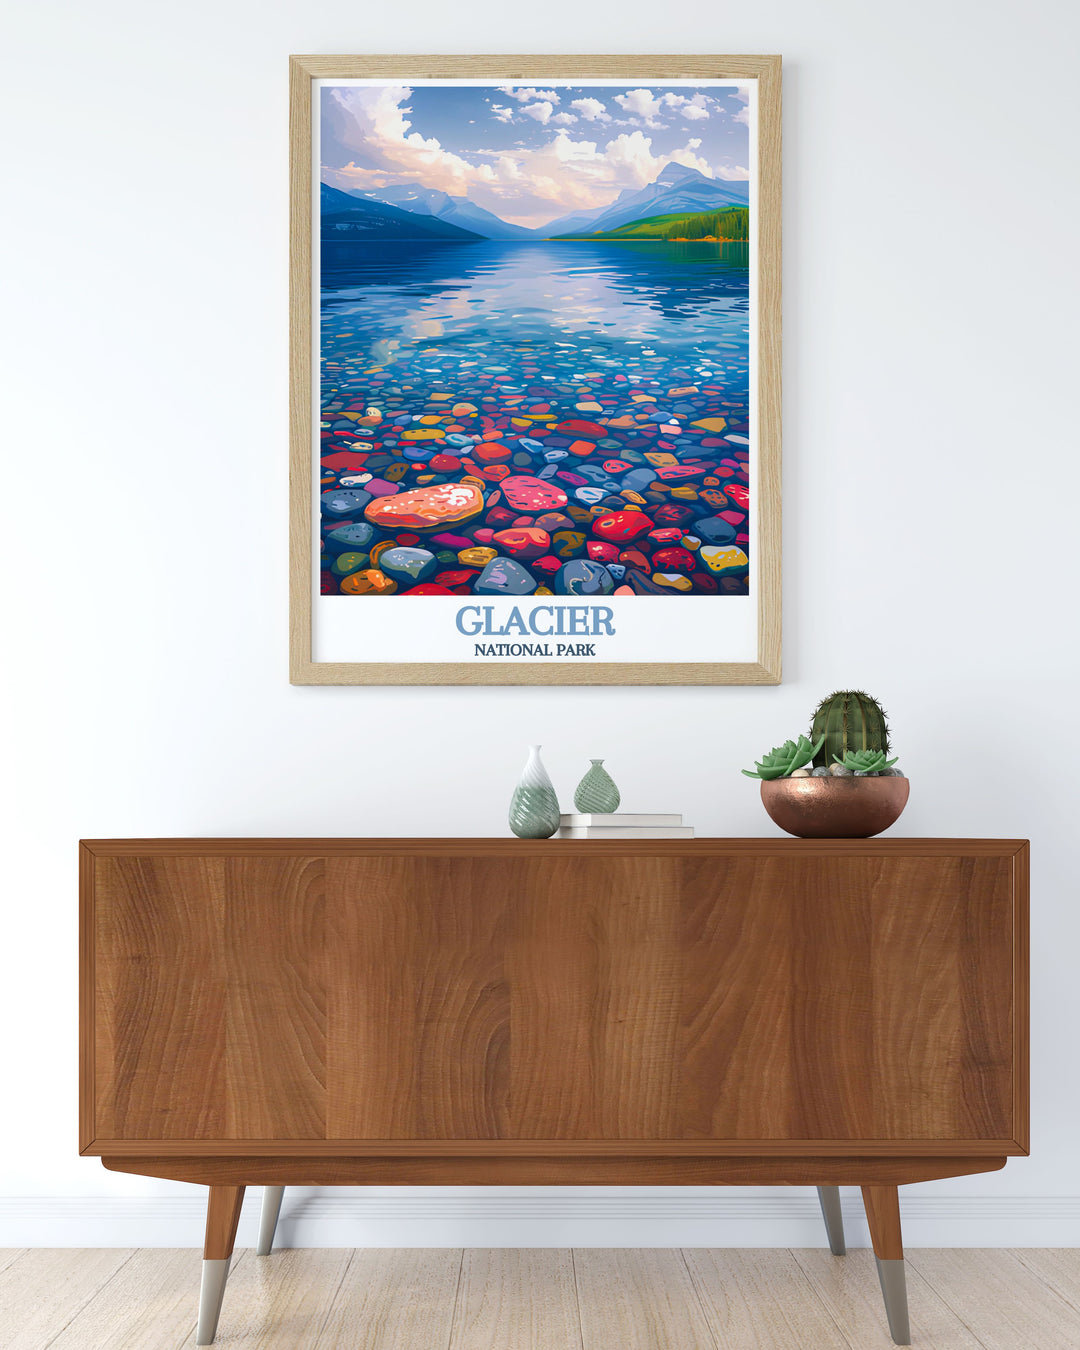 Vintage poster of Lake McDonald, highlighting the serene waters and picturesque landscape of Glacier National Park, ideal for those who love the blend of adventure and natural beauty.